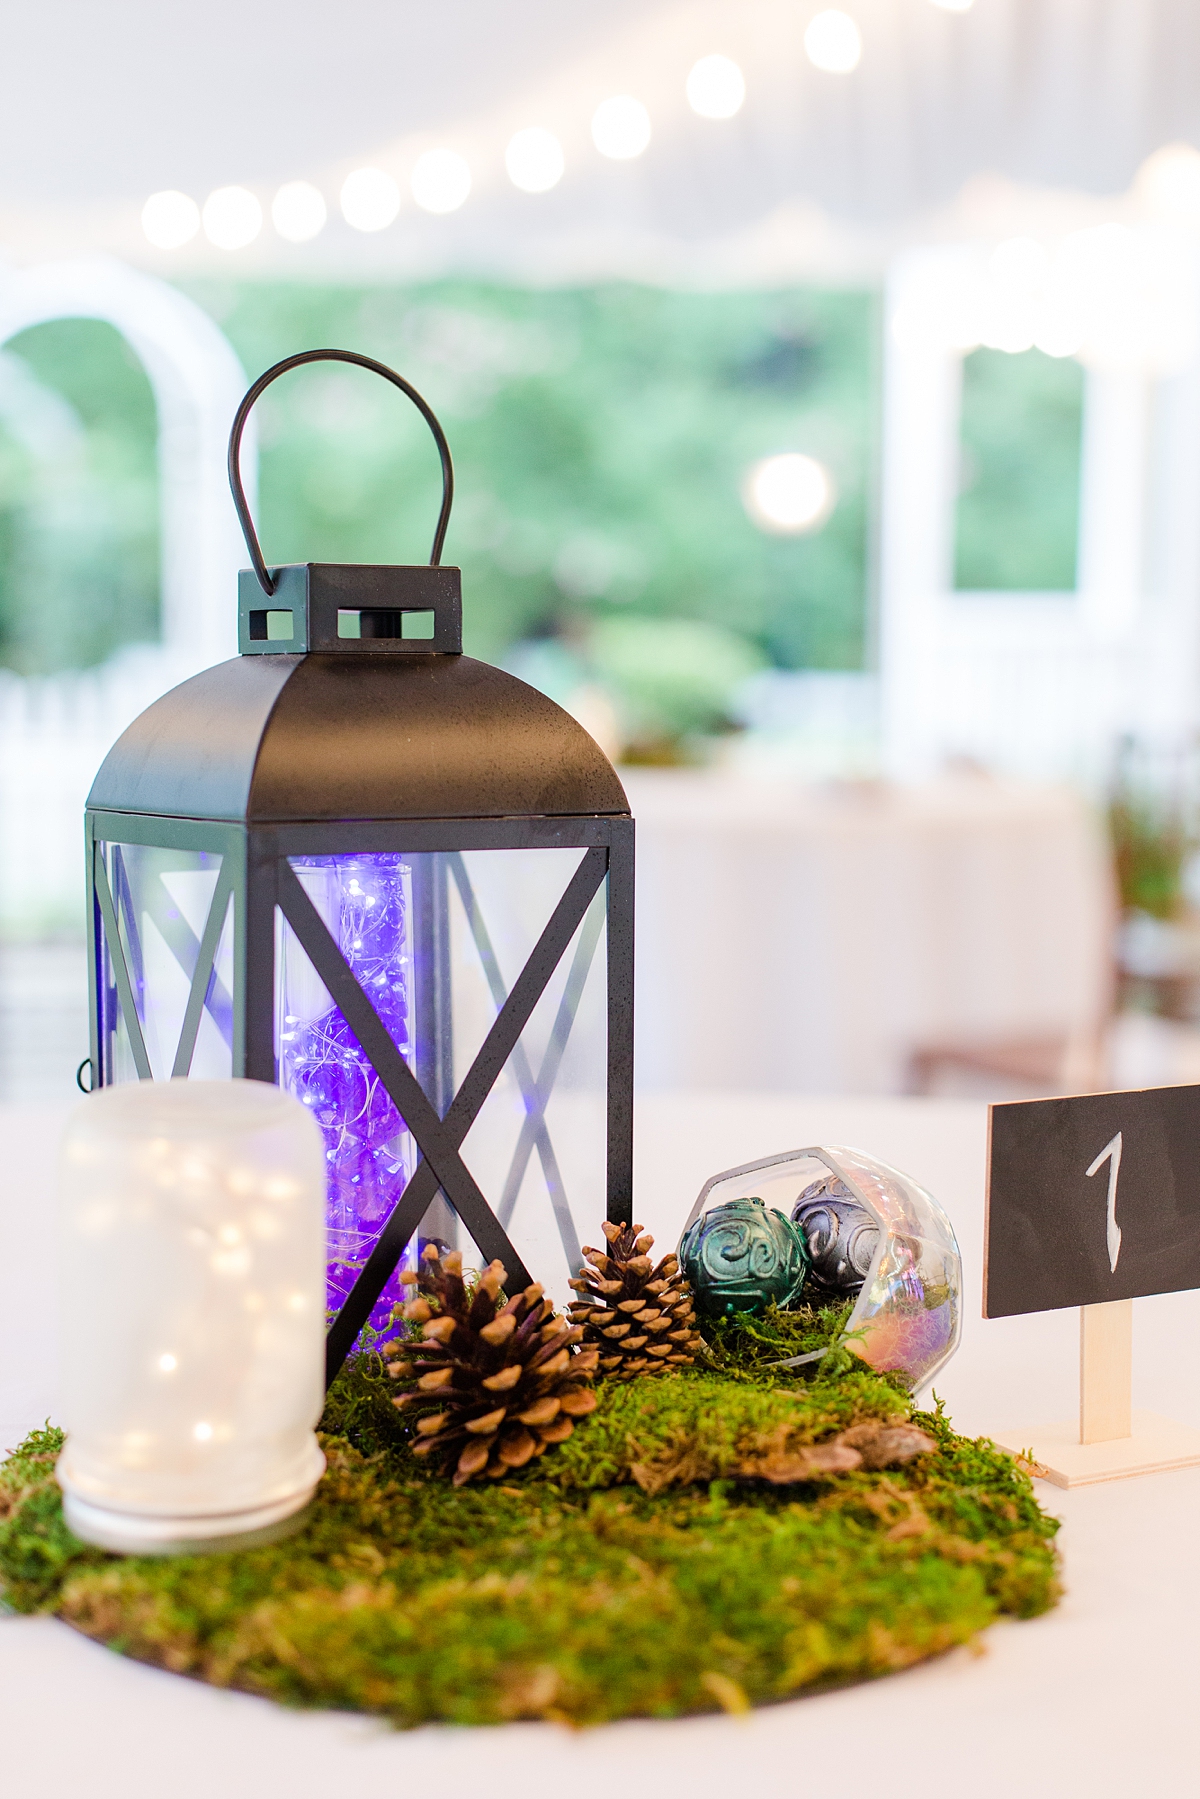 Harry Potter Themed Wedding Reception Decorations at Virginia Cliffe Inn. Wedding Photography by Richmond Wedding Photographer Kailey Brianne Photography. 